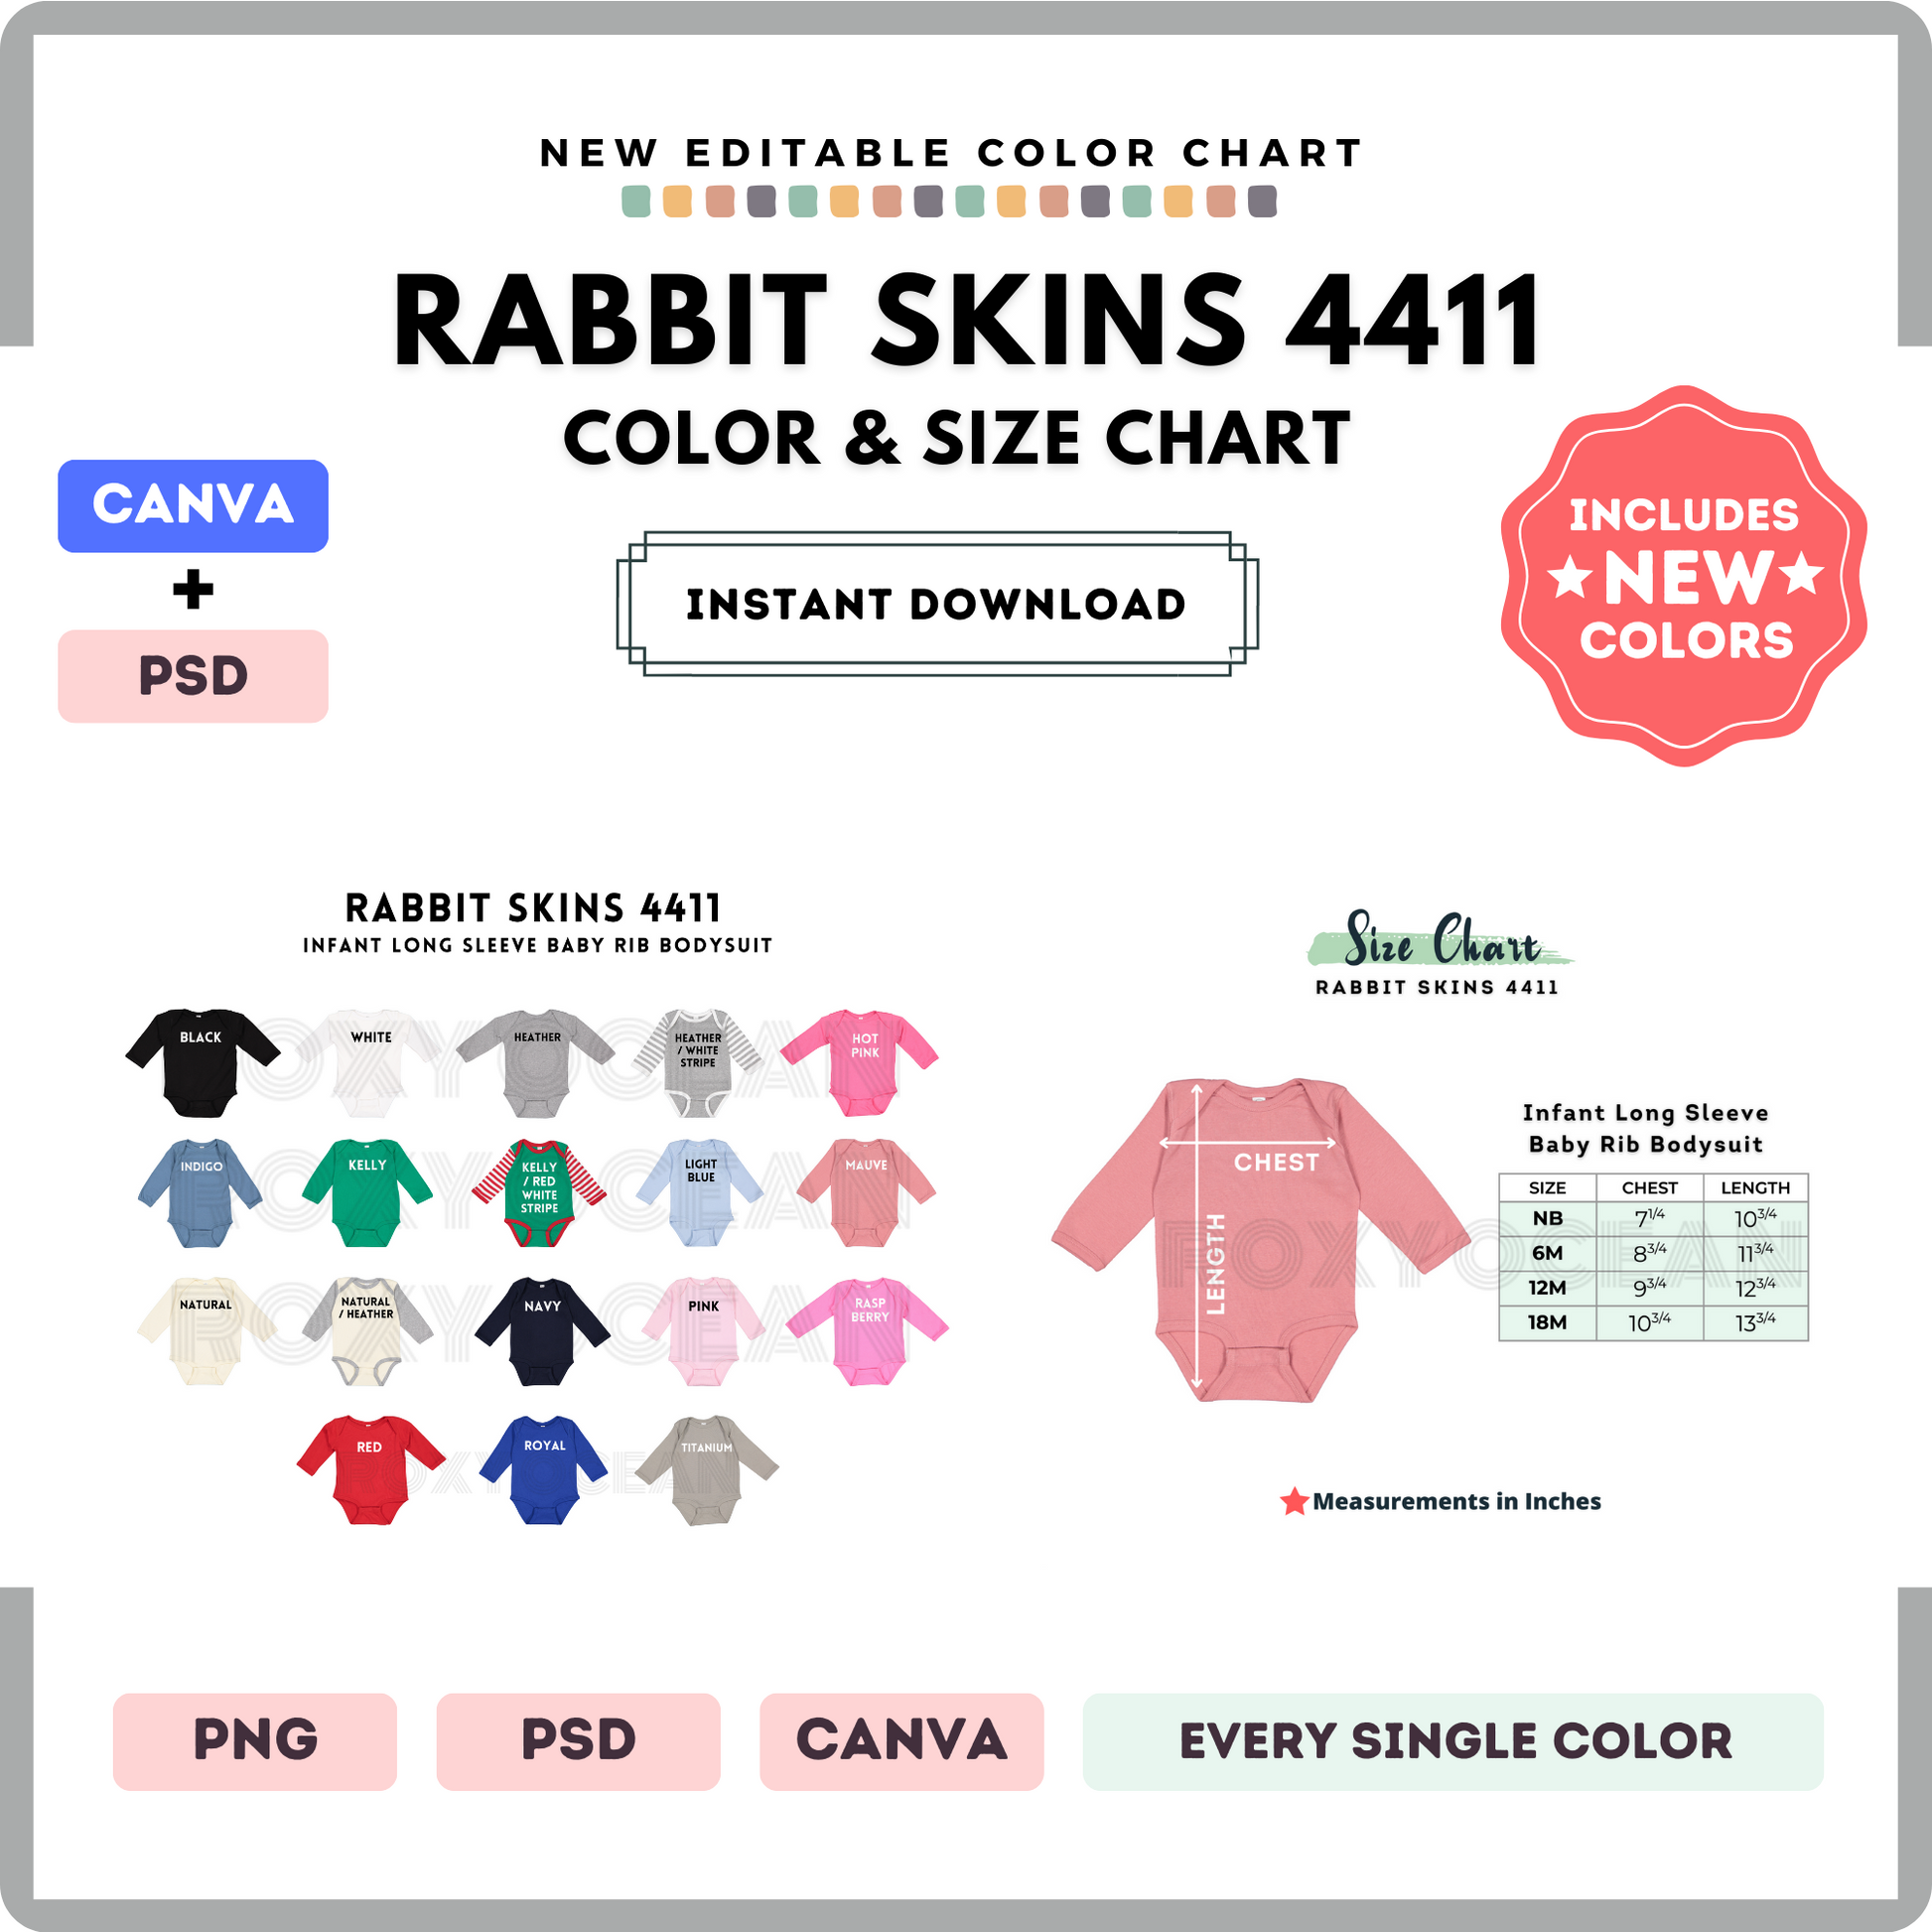 Rabbit Skins 4411 Color and Size Chart